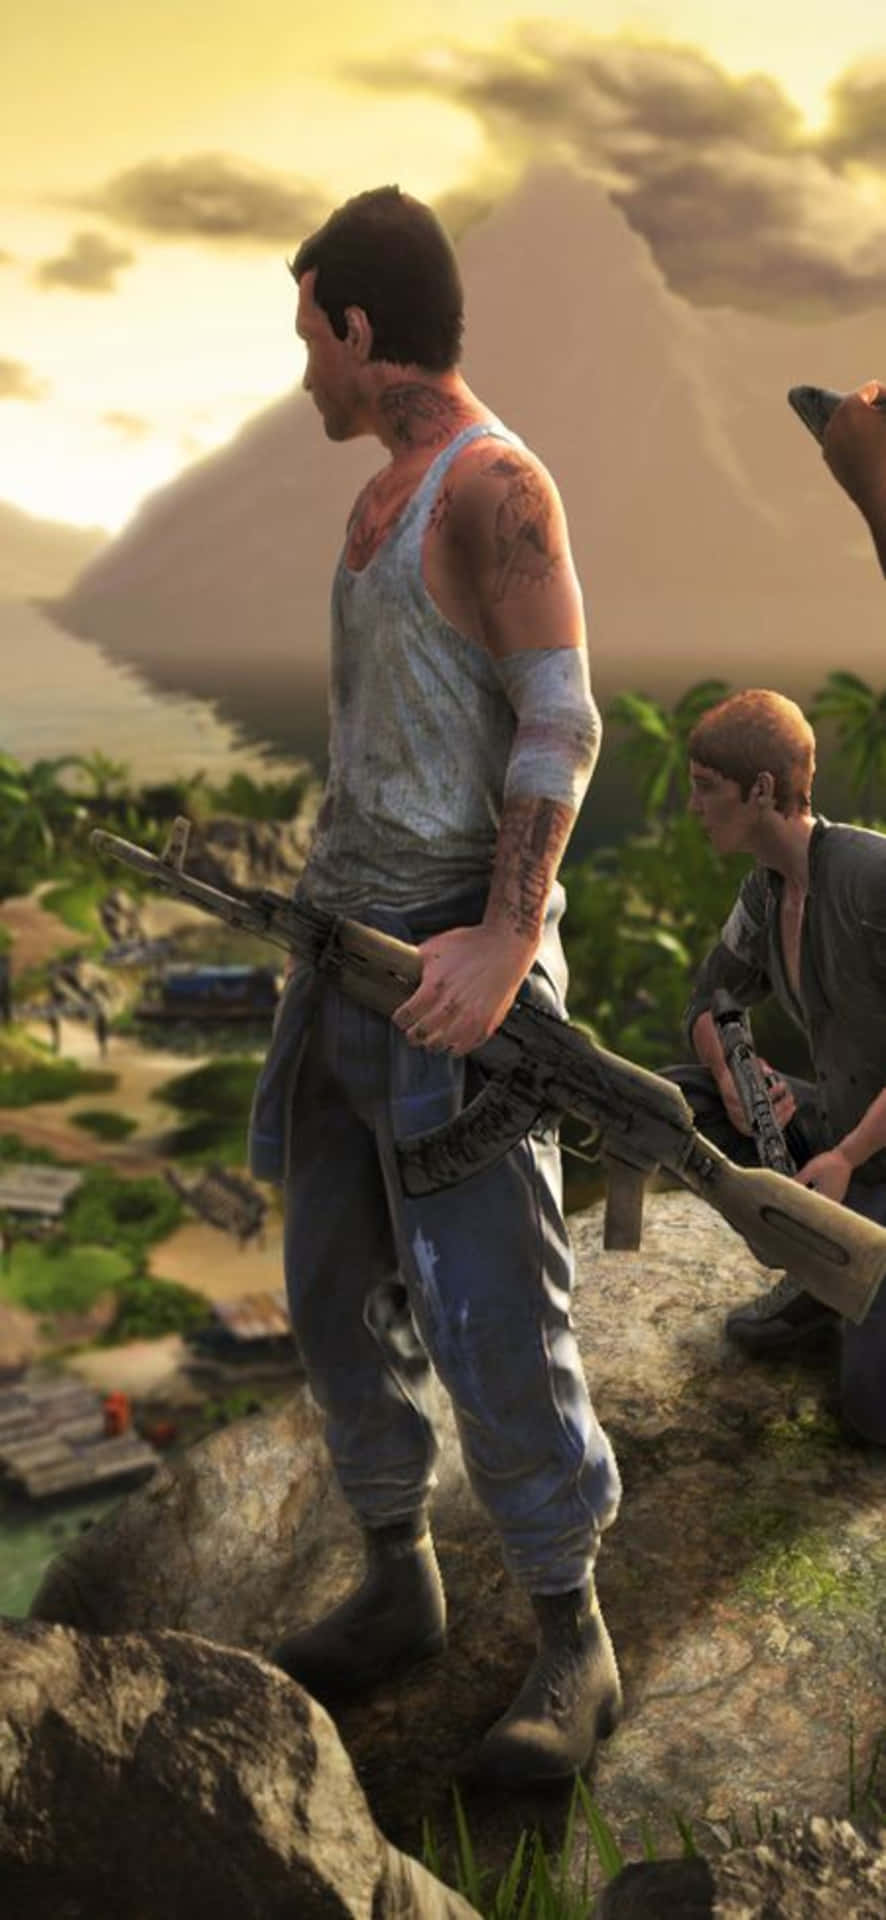 iPhone X Far Cry 3 Disheveled Character Background